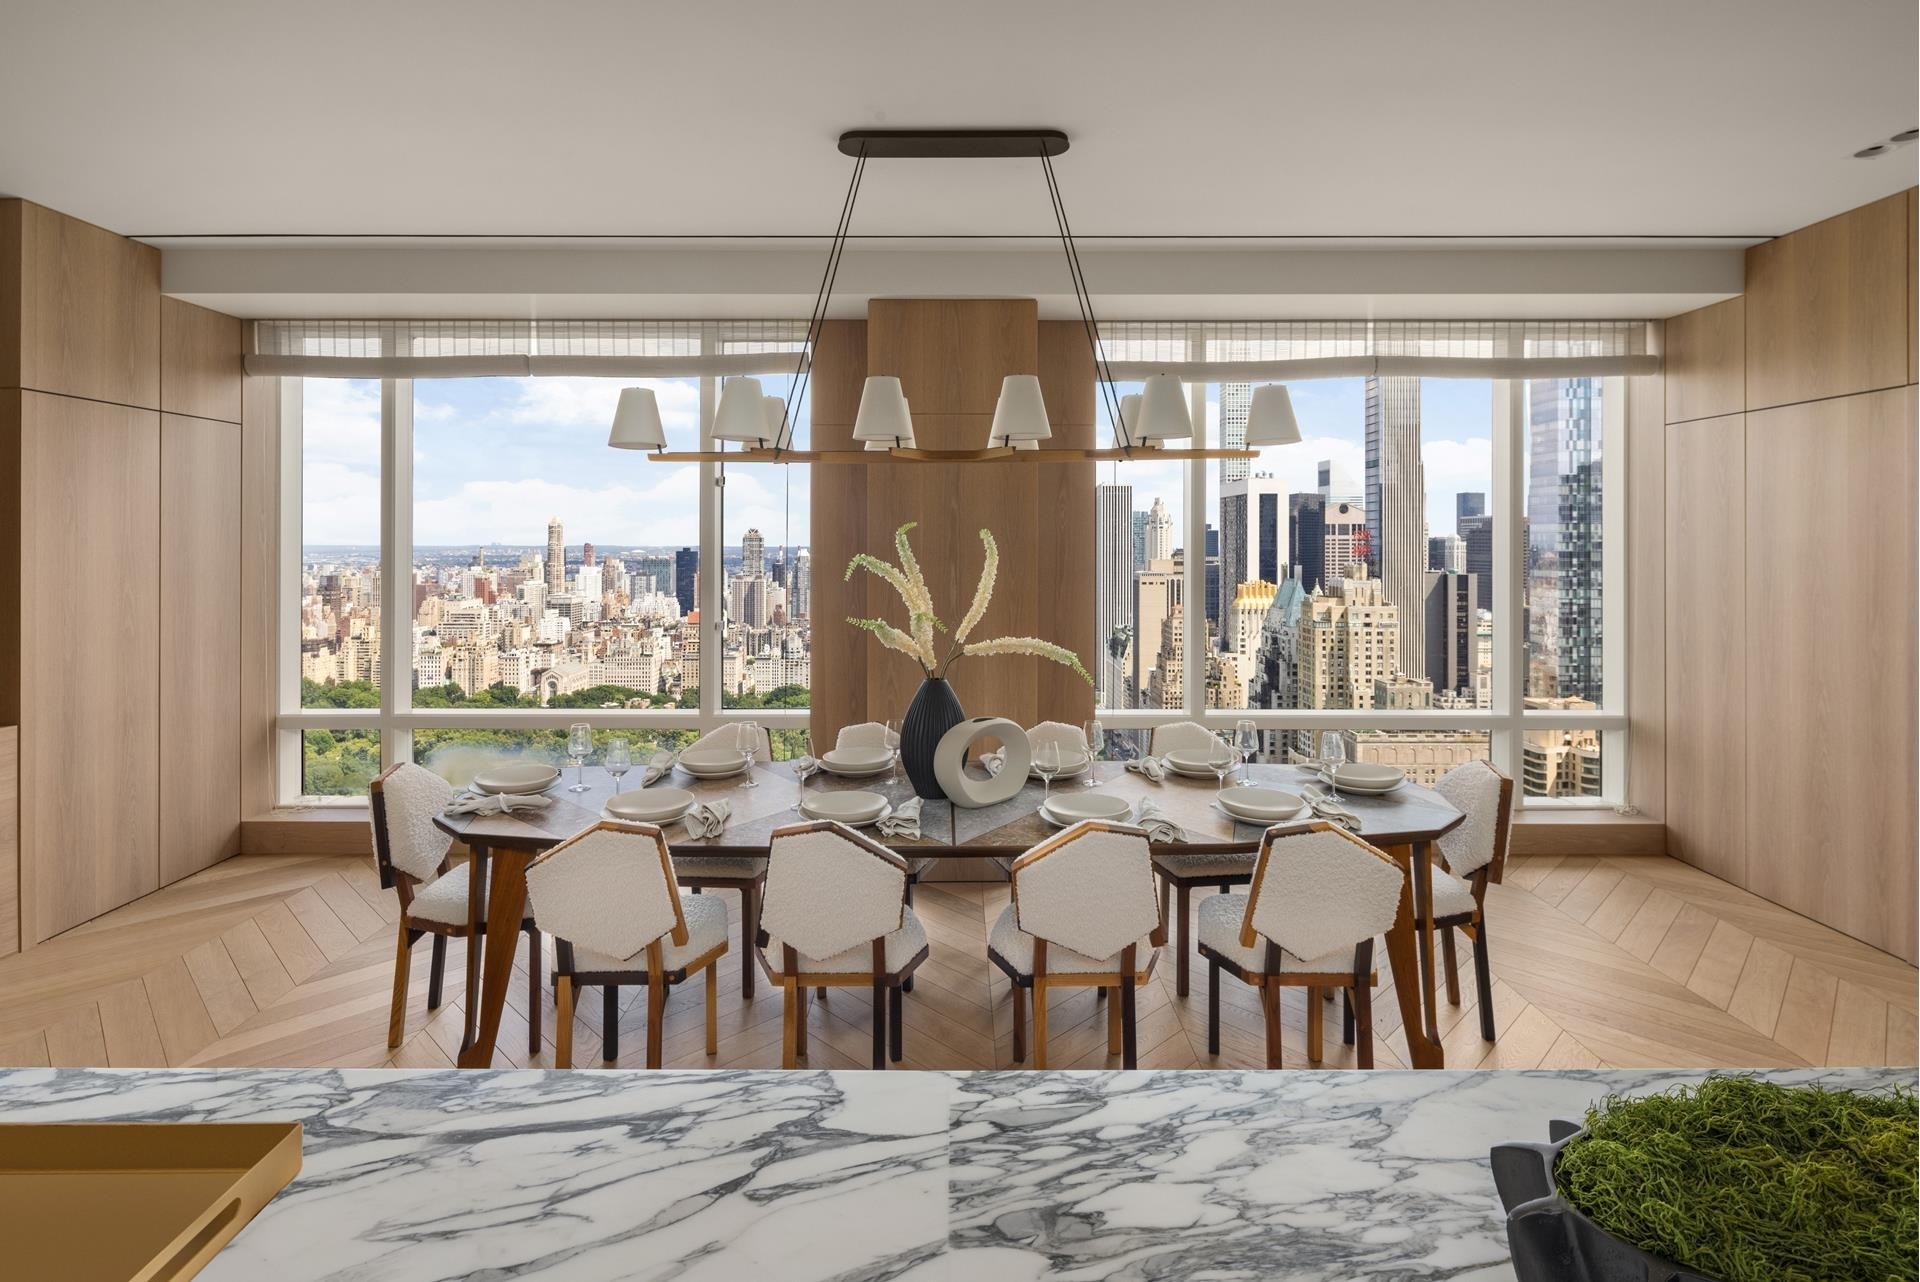 Condominium for Sale at One Central Park West, 1 CENTRAL PARK W, 47BC Lincoln Square, New York, NY 10023